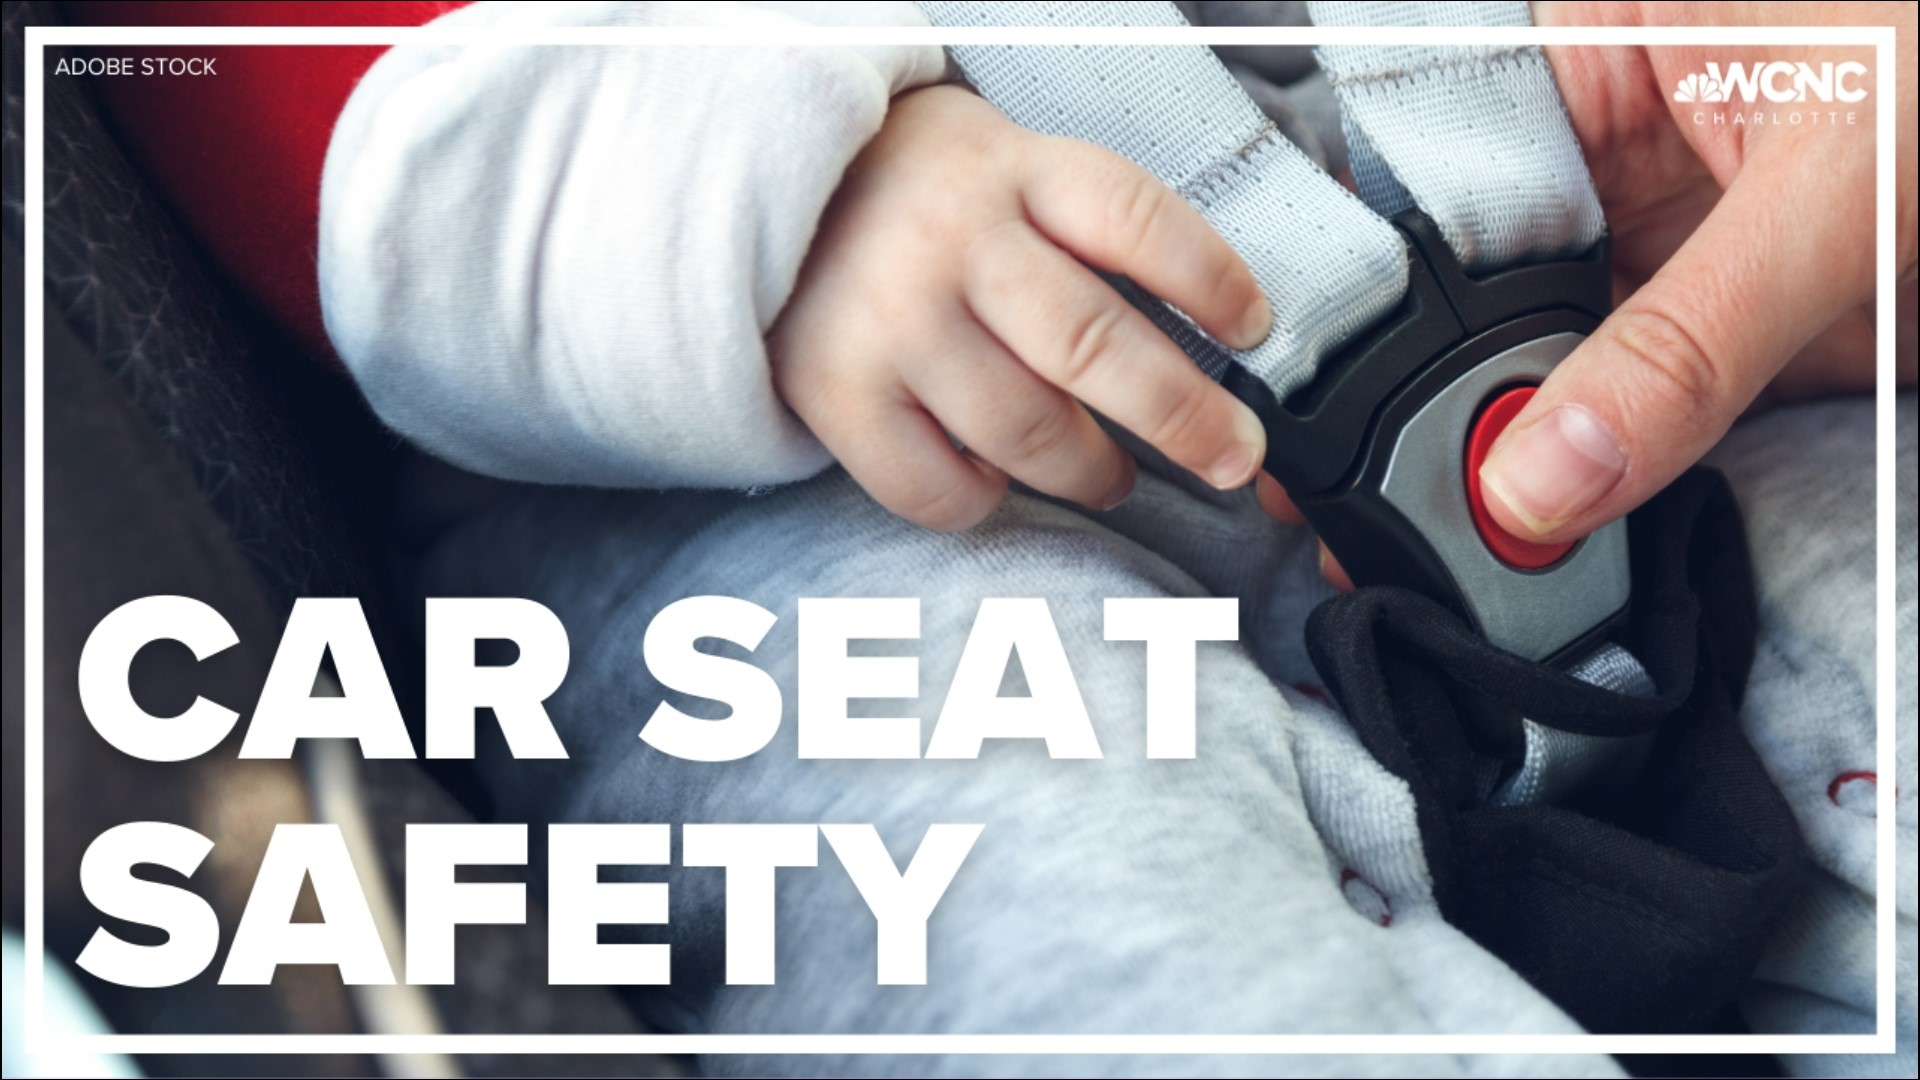 According to the NHTSA, car crashes are a leading cause of death for children ages one to 13. But when installed properly, a car seat can save a life.